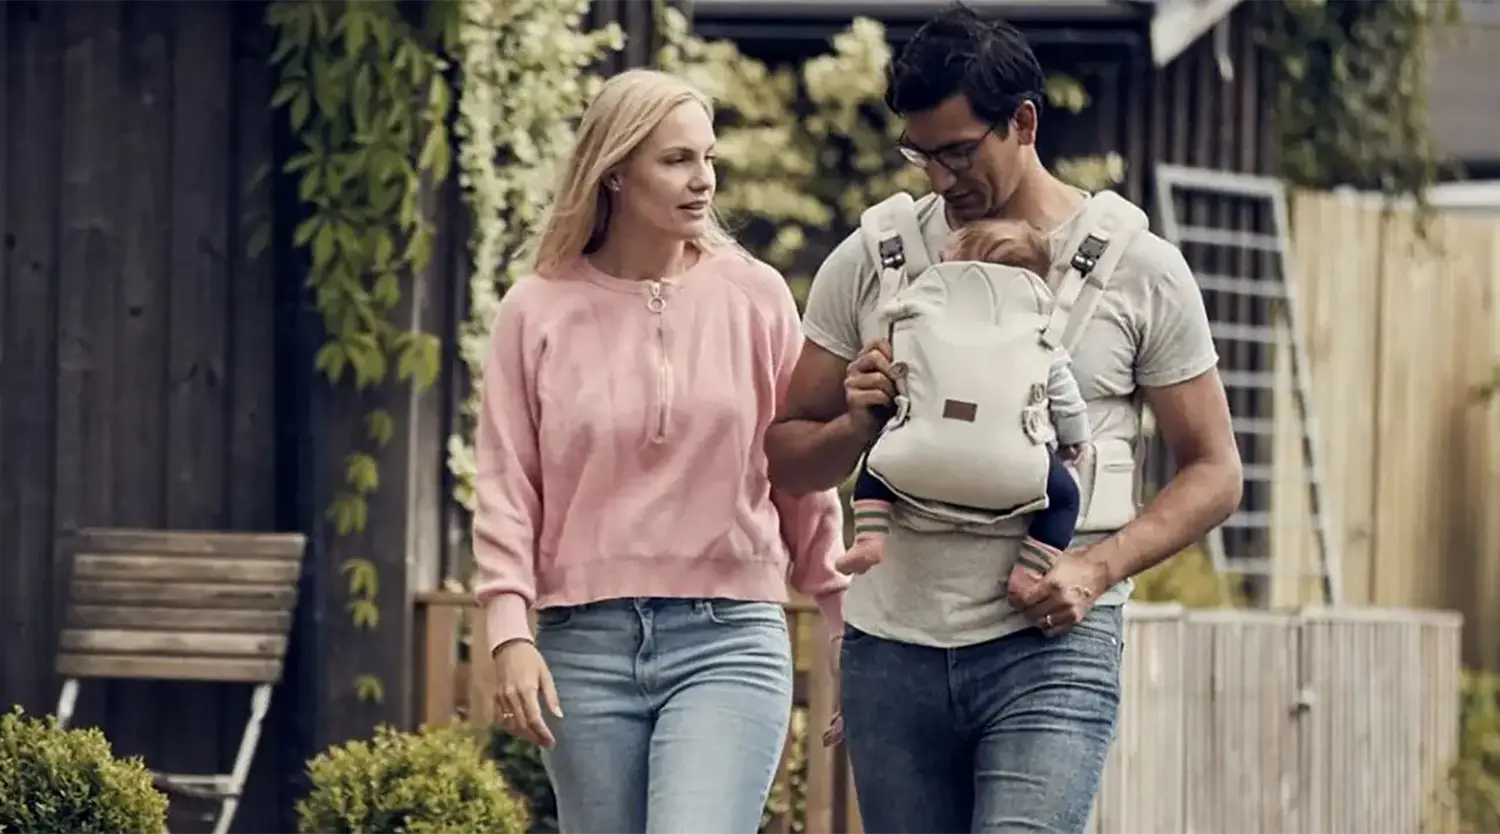 A man and woman walking together. The man is carrying a baby in a baby carrier strapped to his chest.
